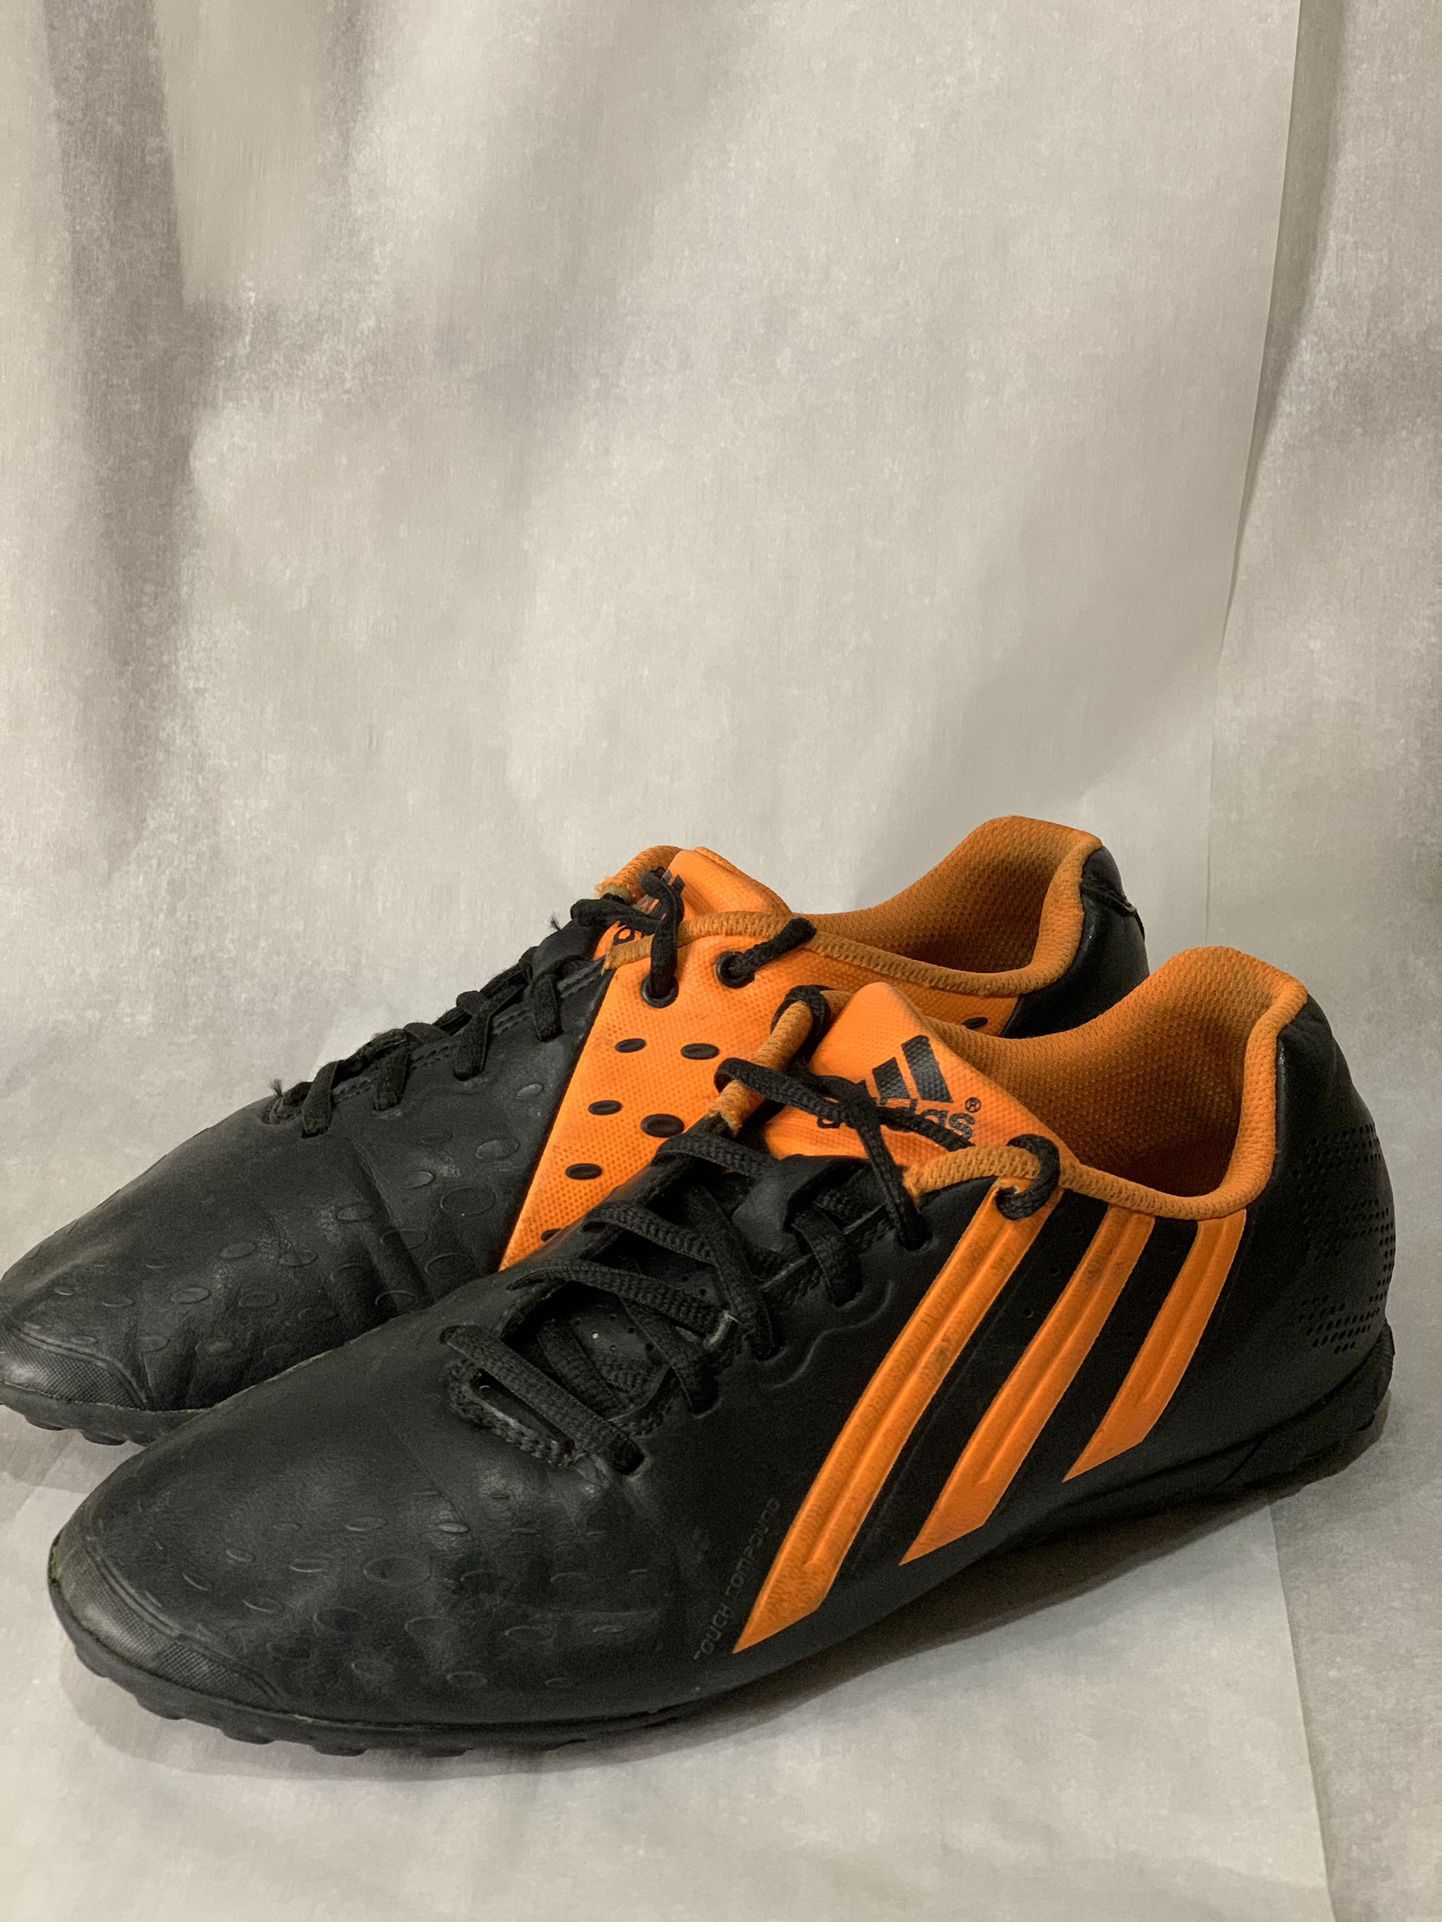 Agacharse Espacio cibernético Varios Messi Adidas soccer shoes cleats US 8,5 for Sale in Brooklyn, NY - OfferUp